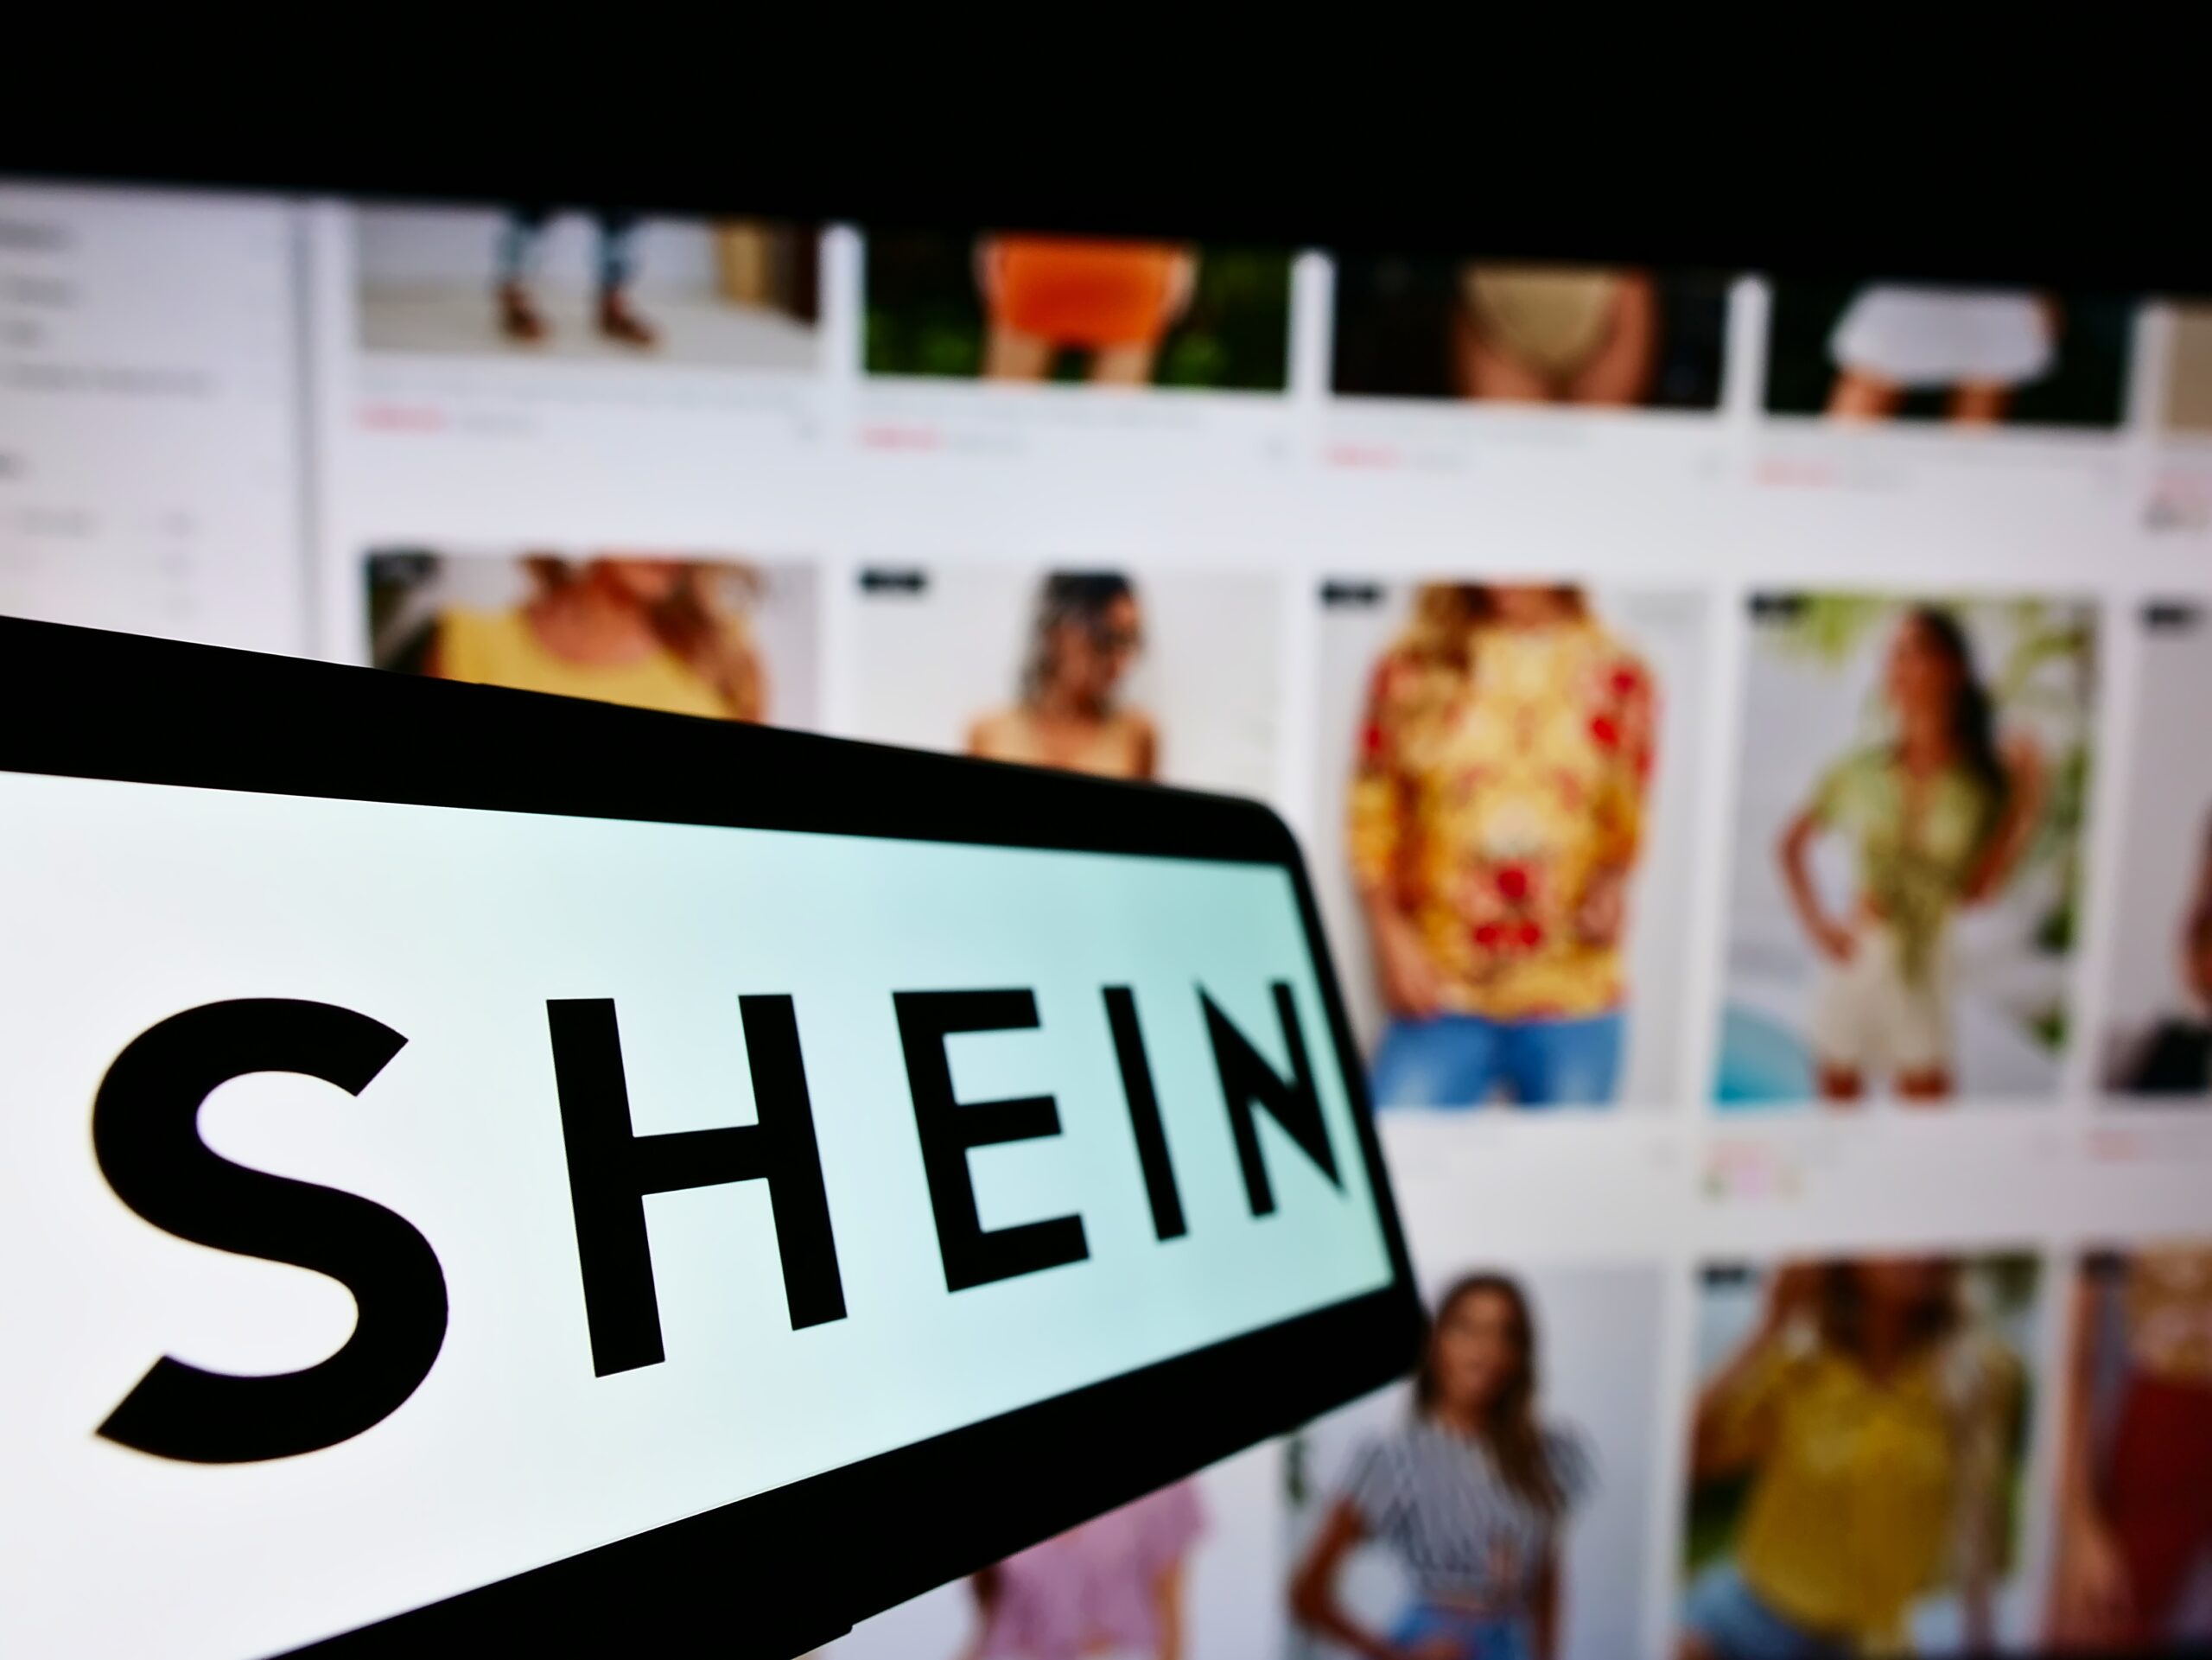 Shein's Return Policy: Get A Refund For Items That Don't Fit!